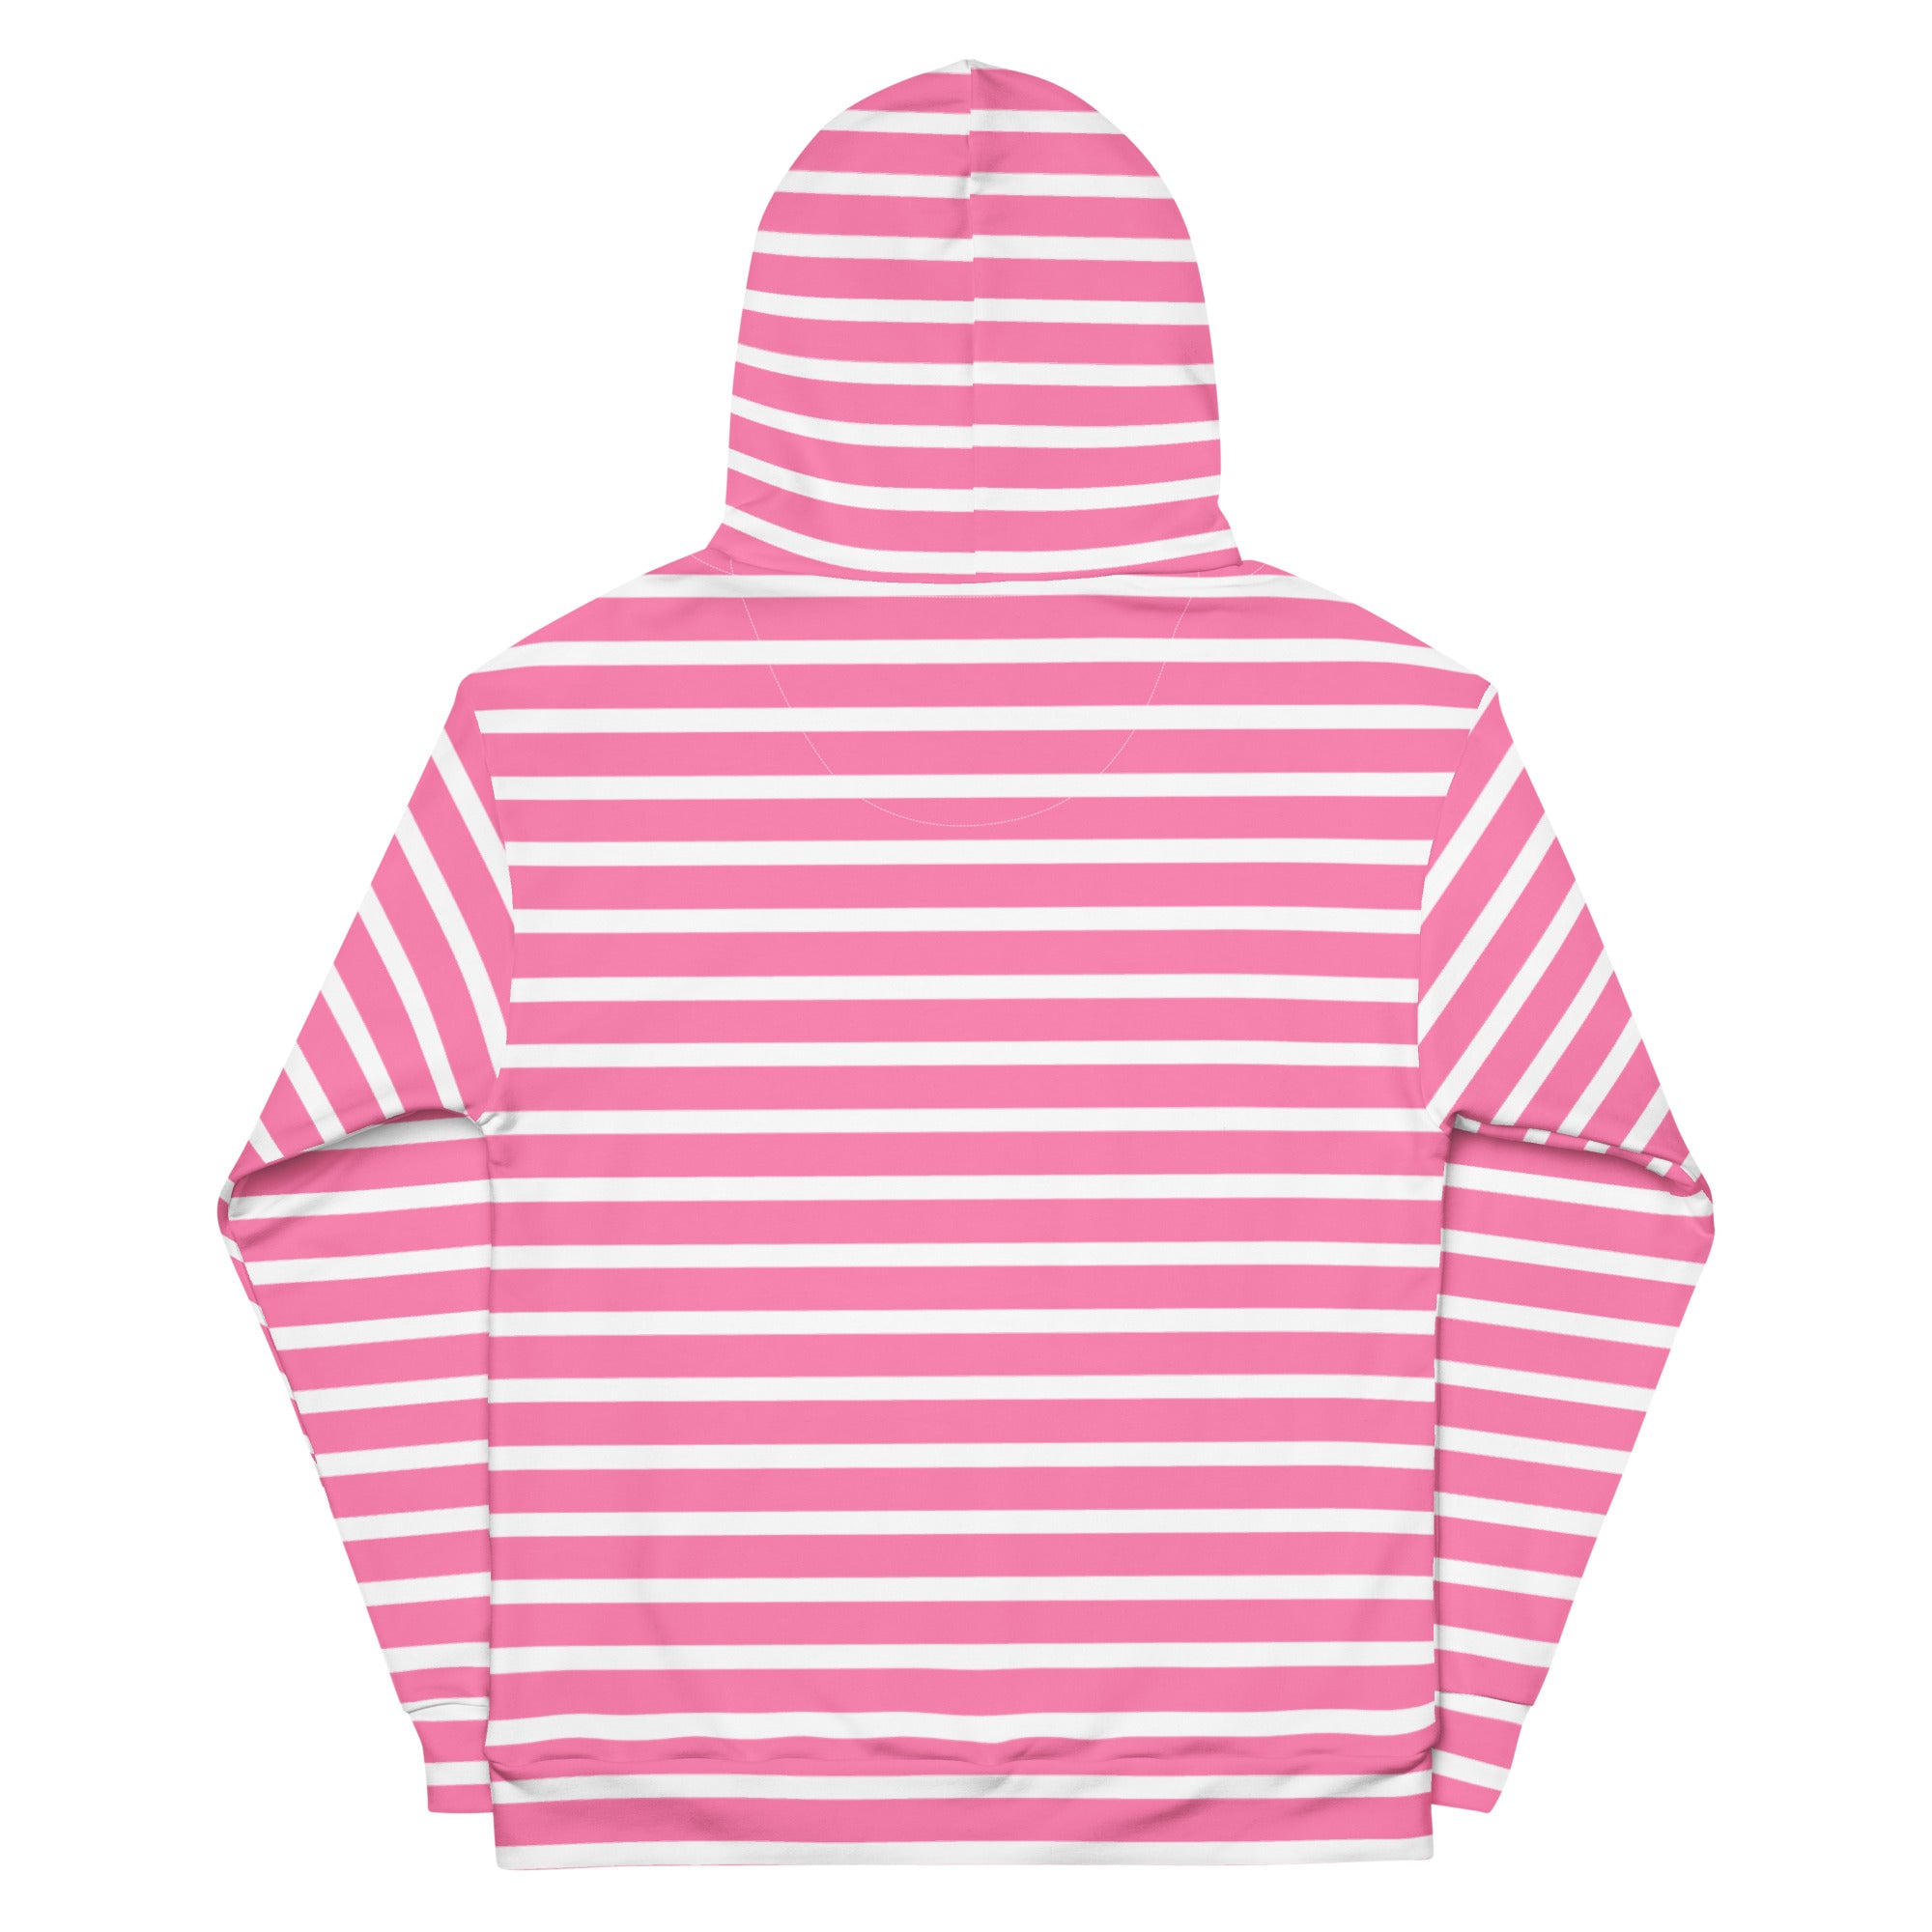 Unisex Hoodie- White and Pink Striped